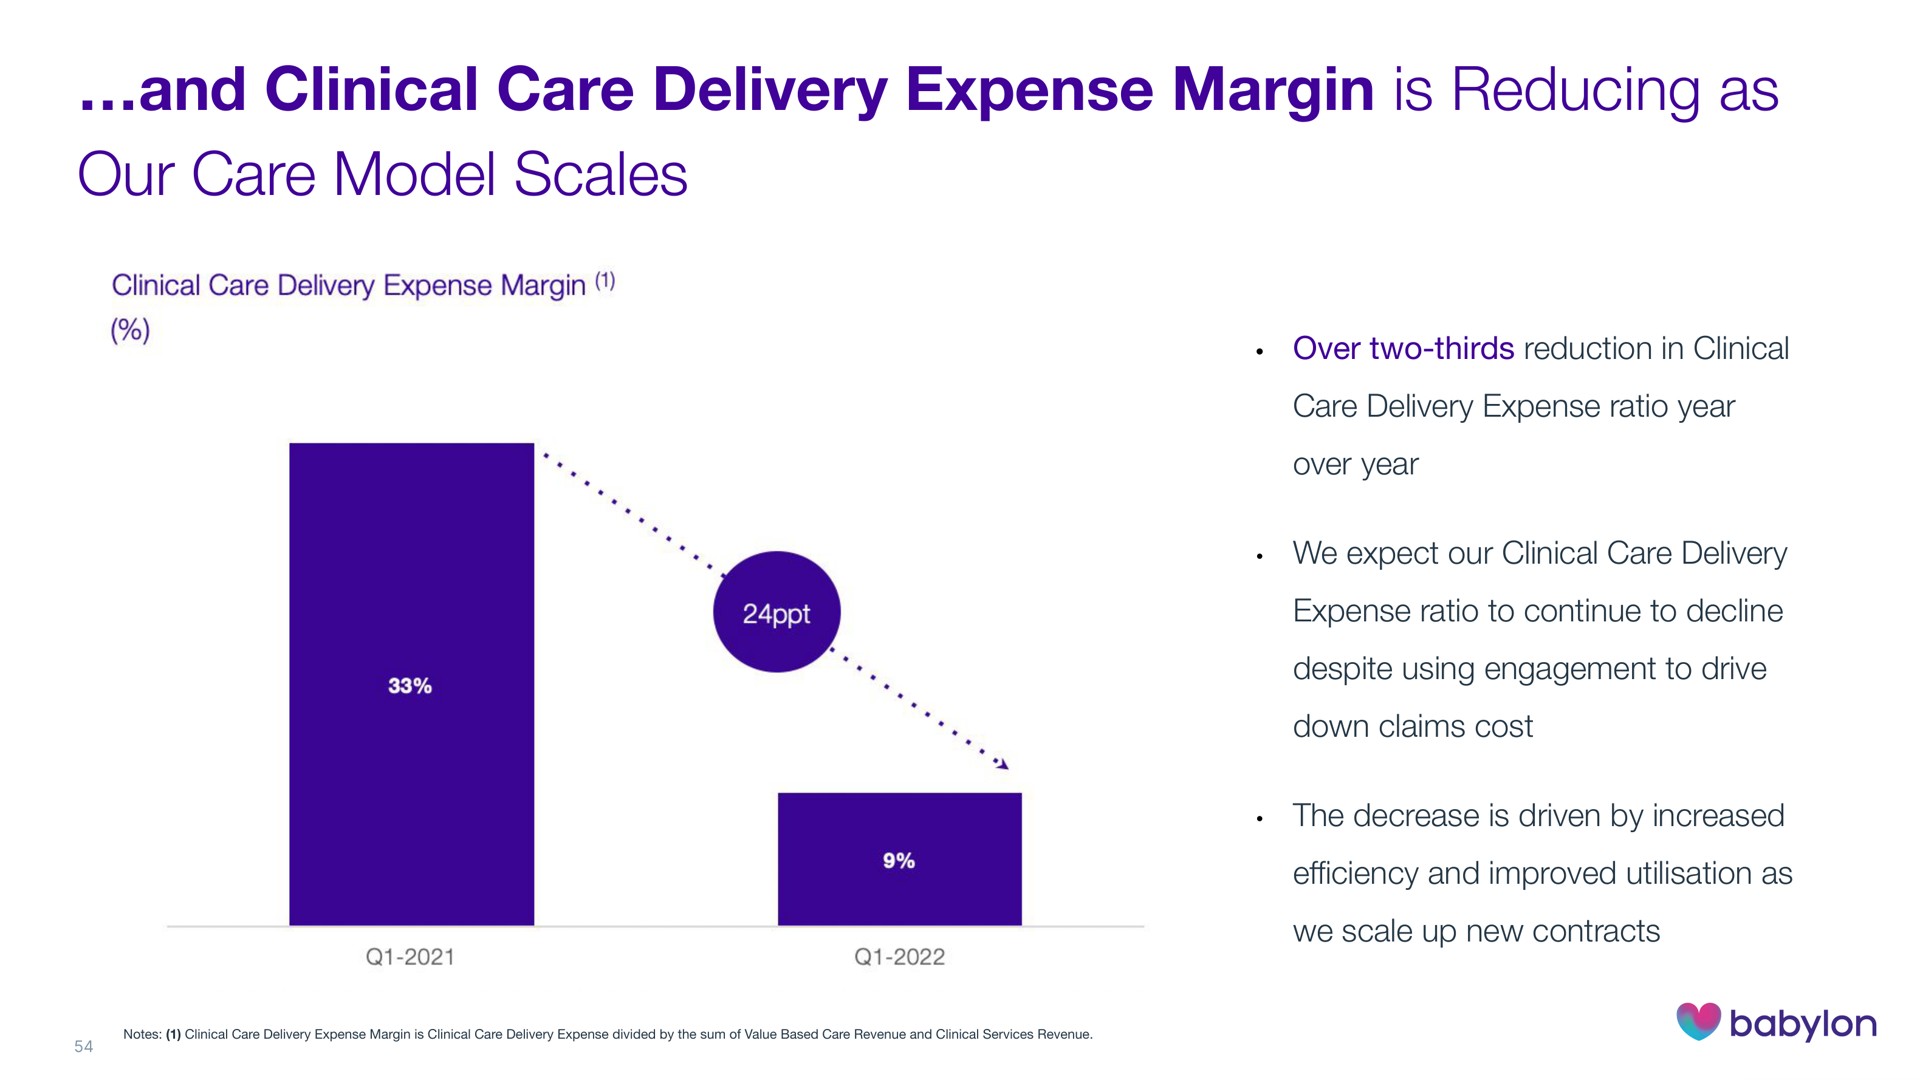 and clinical care delivery expense margin is reducing as our care model scales | Babylon